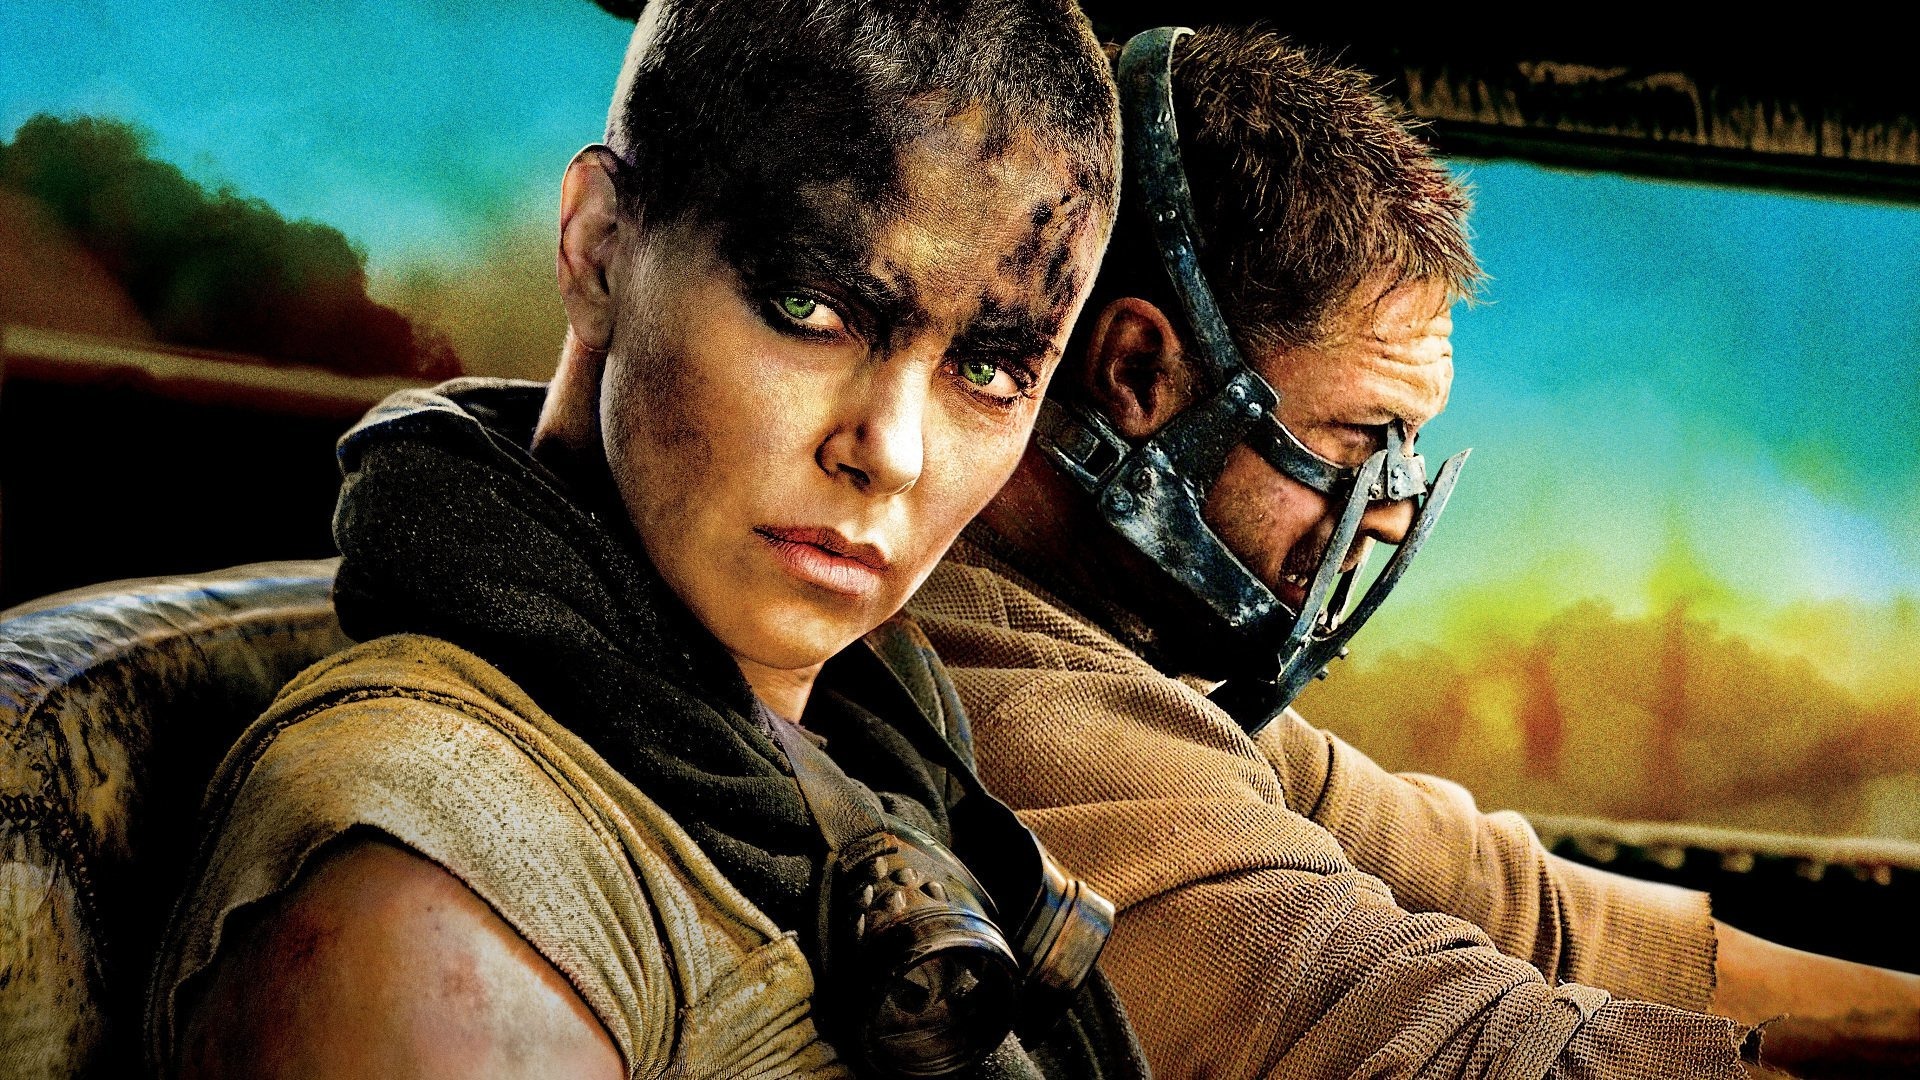 "Il n'y a aucune excuse" : George Miller raconte le tournage tendu de Mad Max Fury Road entre Charlize Theron et Tom Hardy